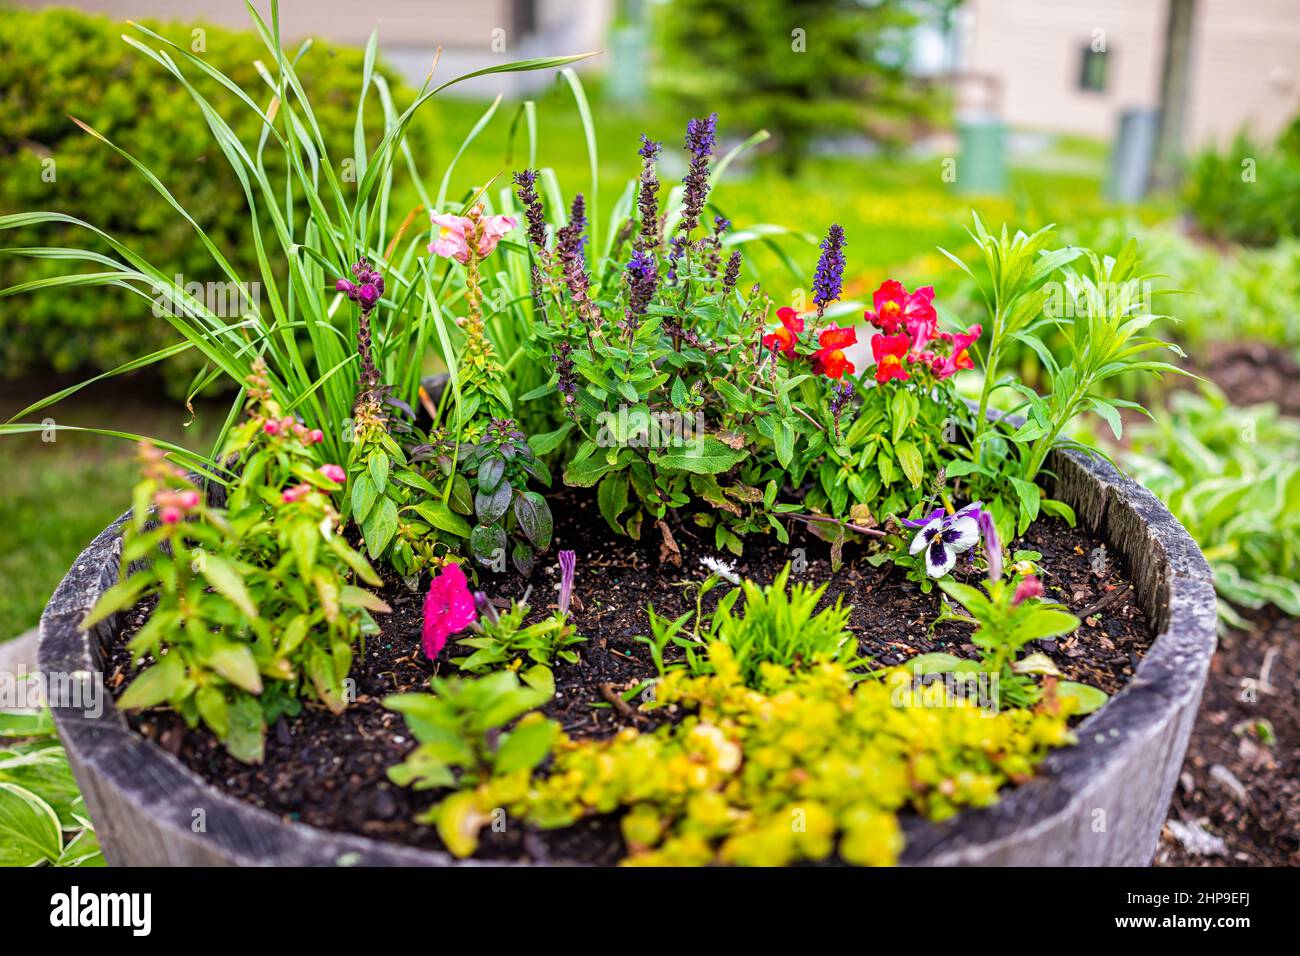 Garden park decoration closeup of potted flowers herbs outdoors with snapdragons, sage and prunella self-heal plants arrangement in large soil wooden Stock Photo